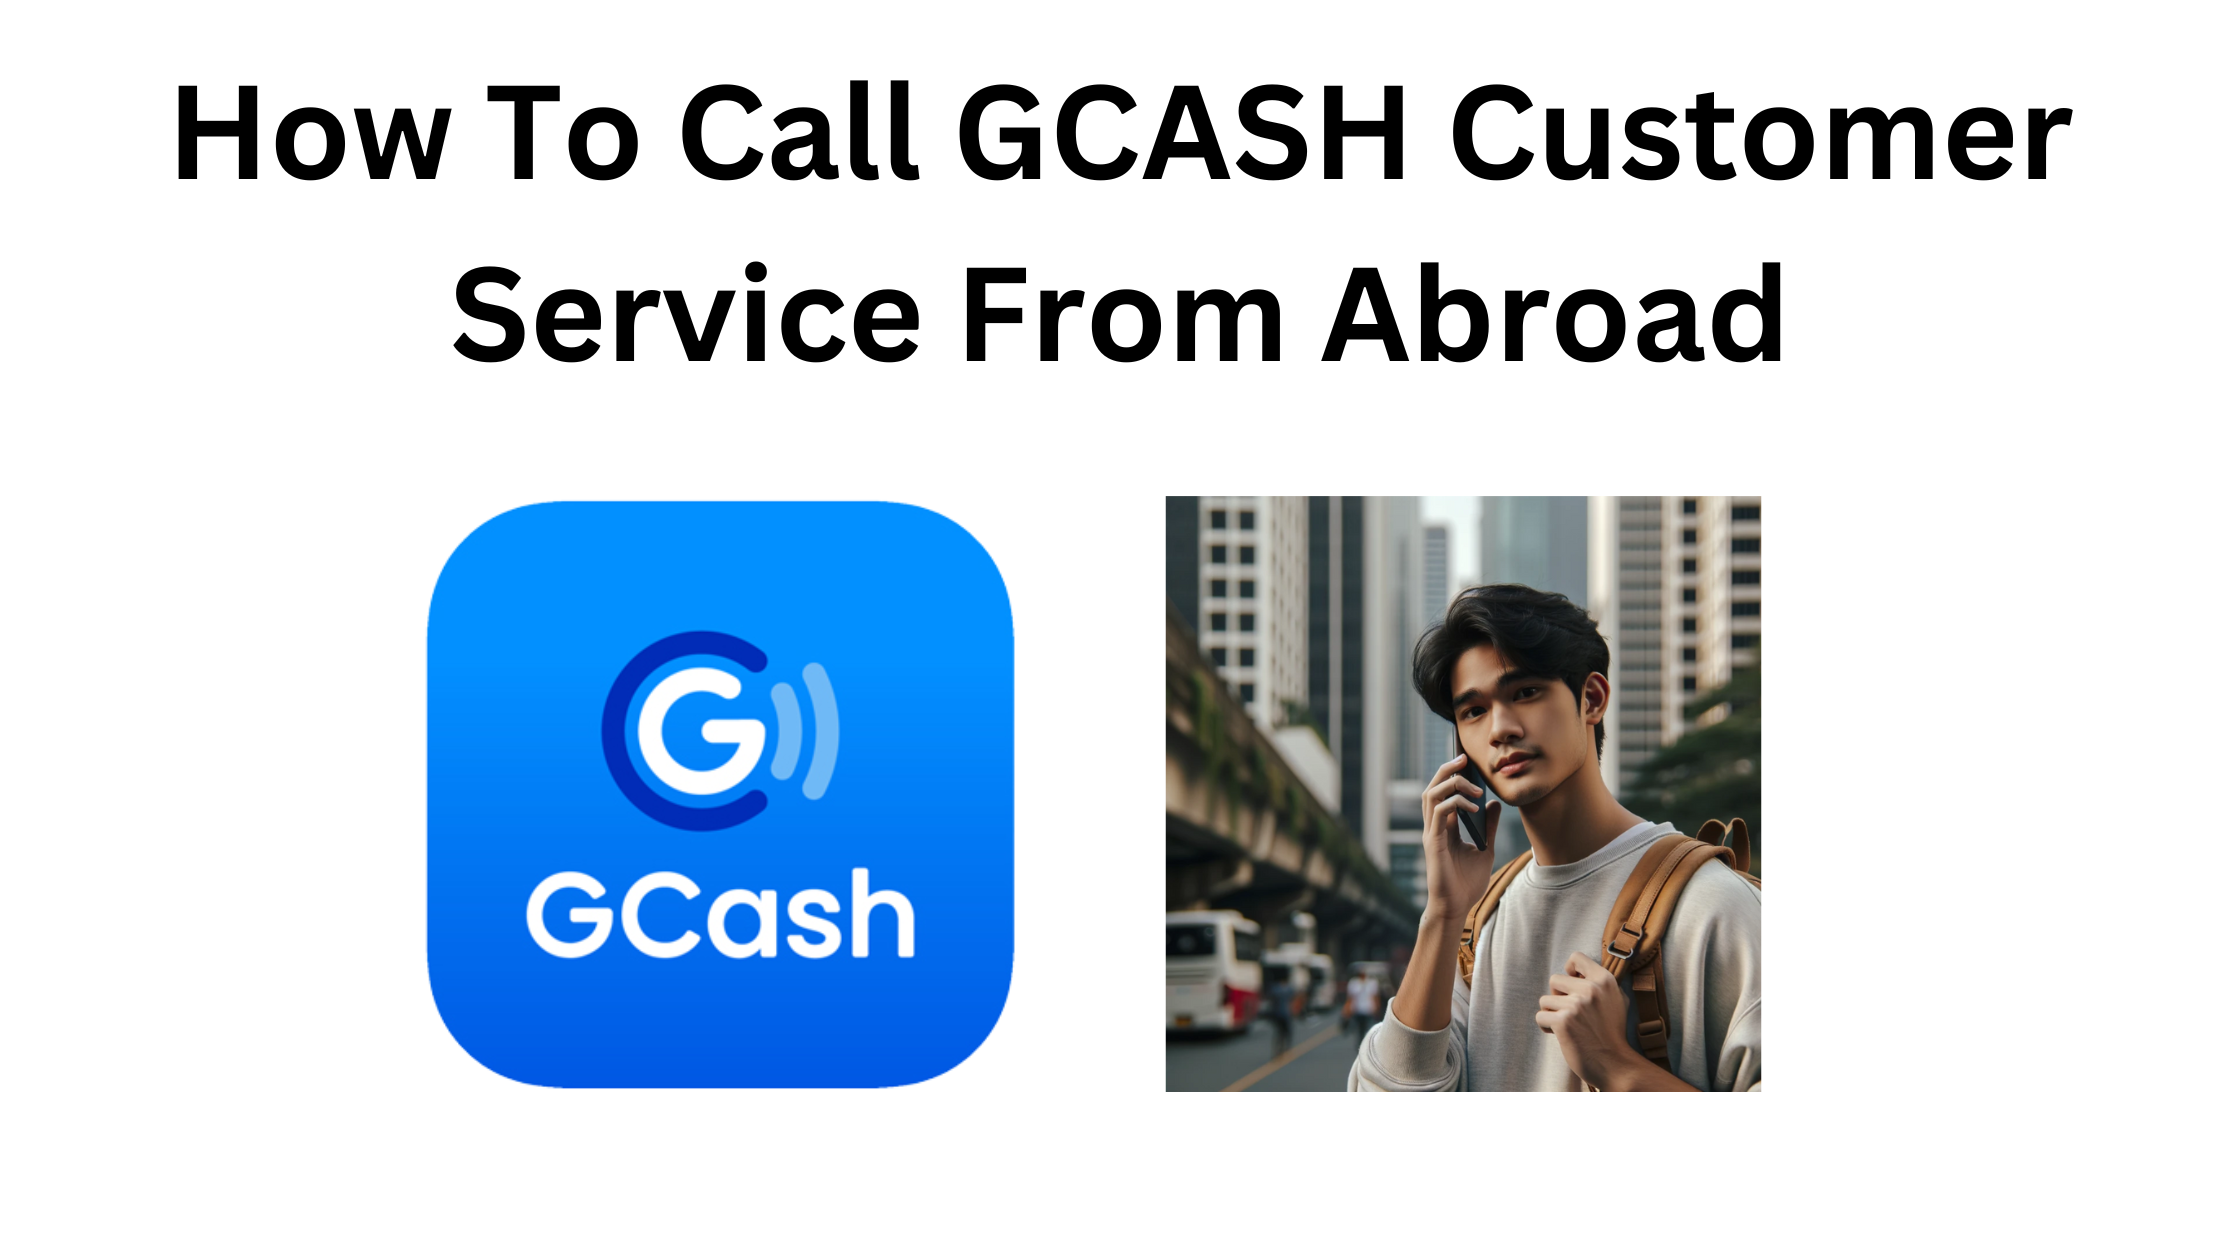 How To Call GCASH Customer Service From Abroad